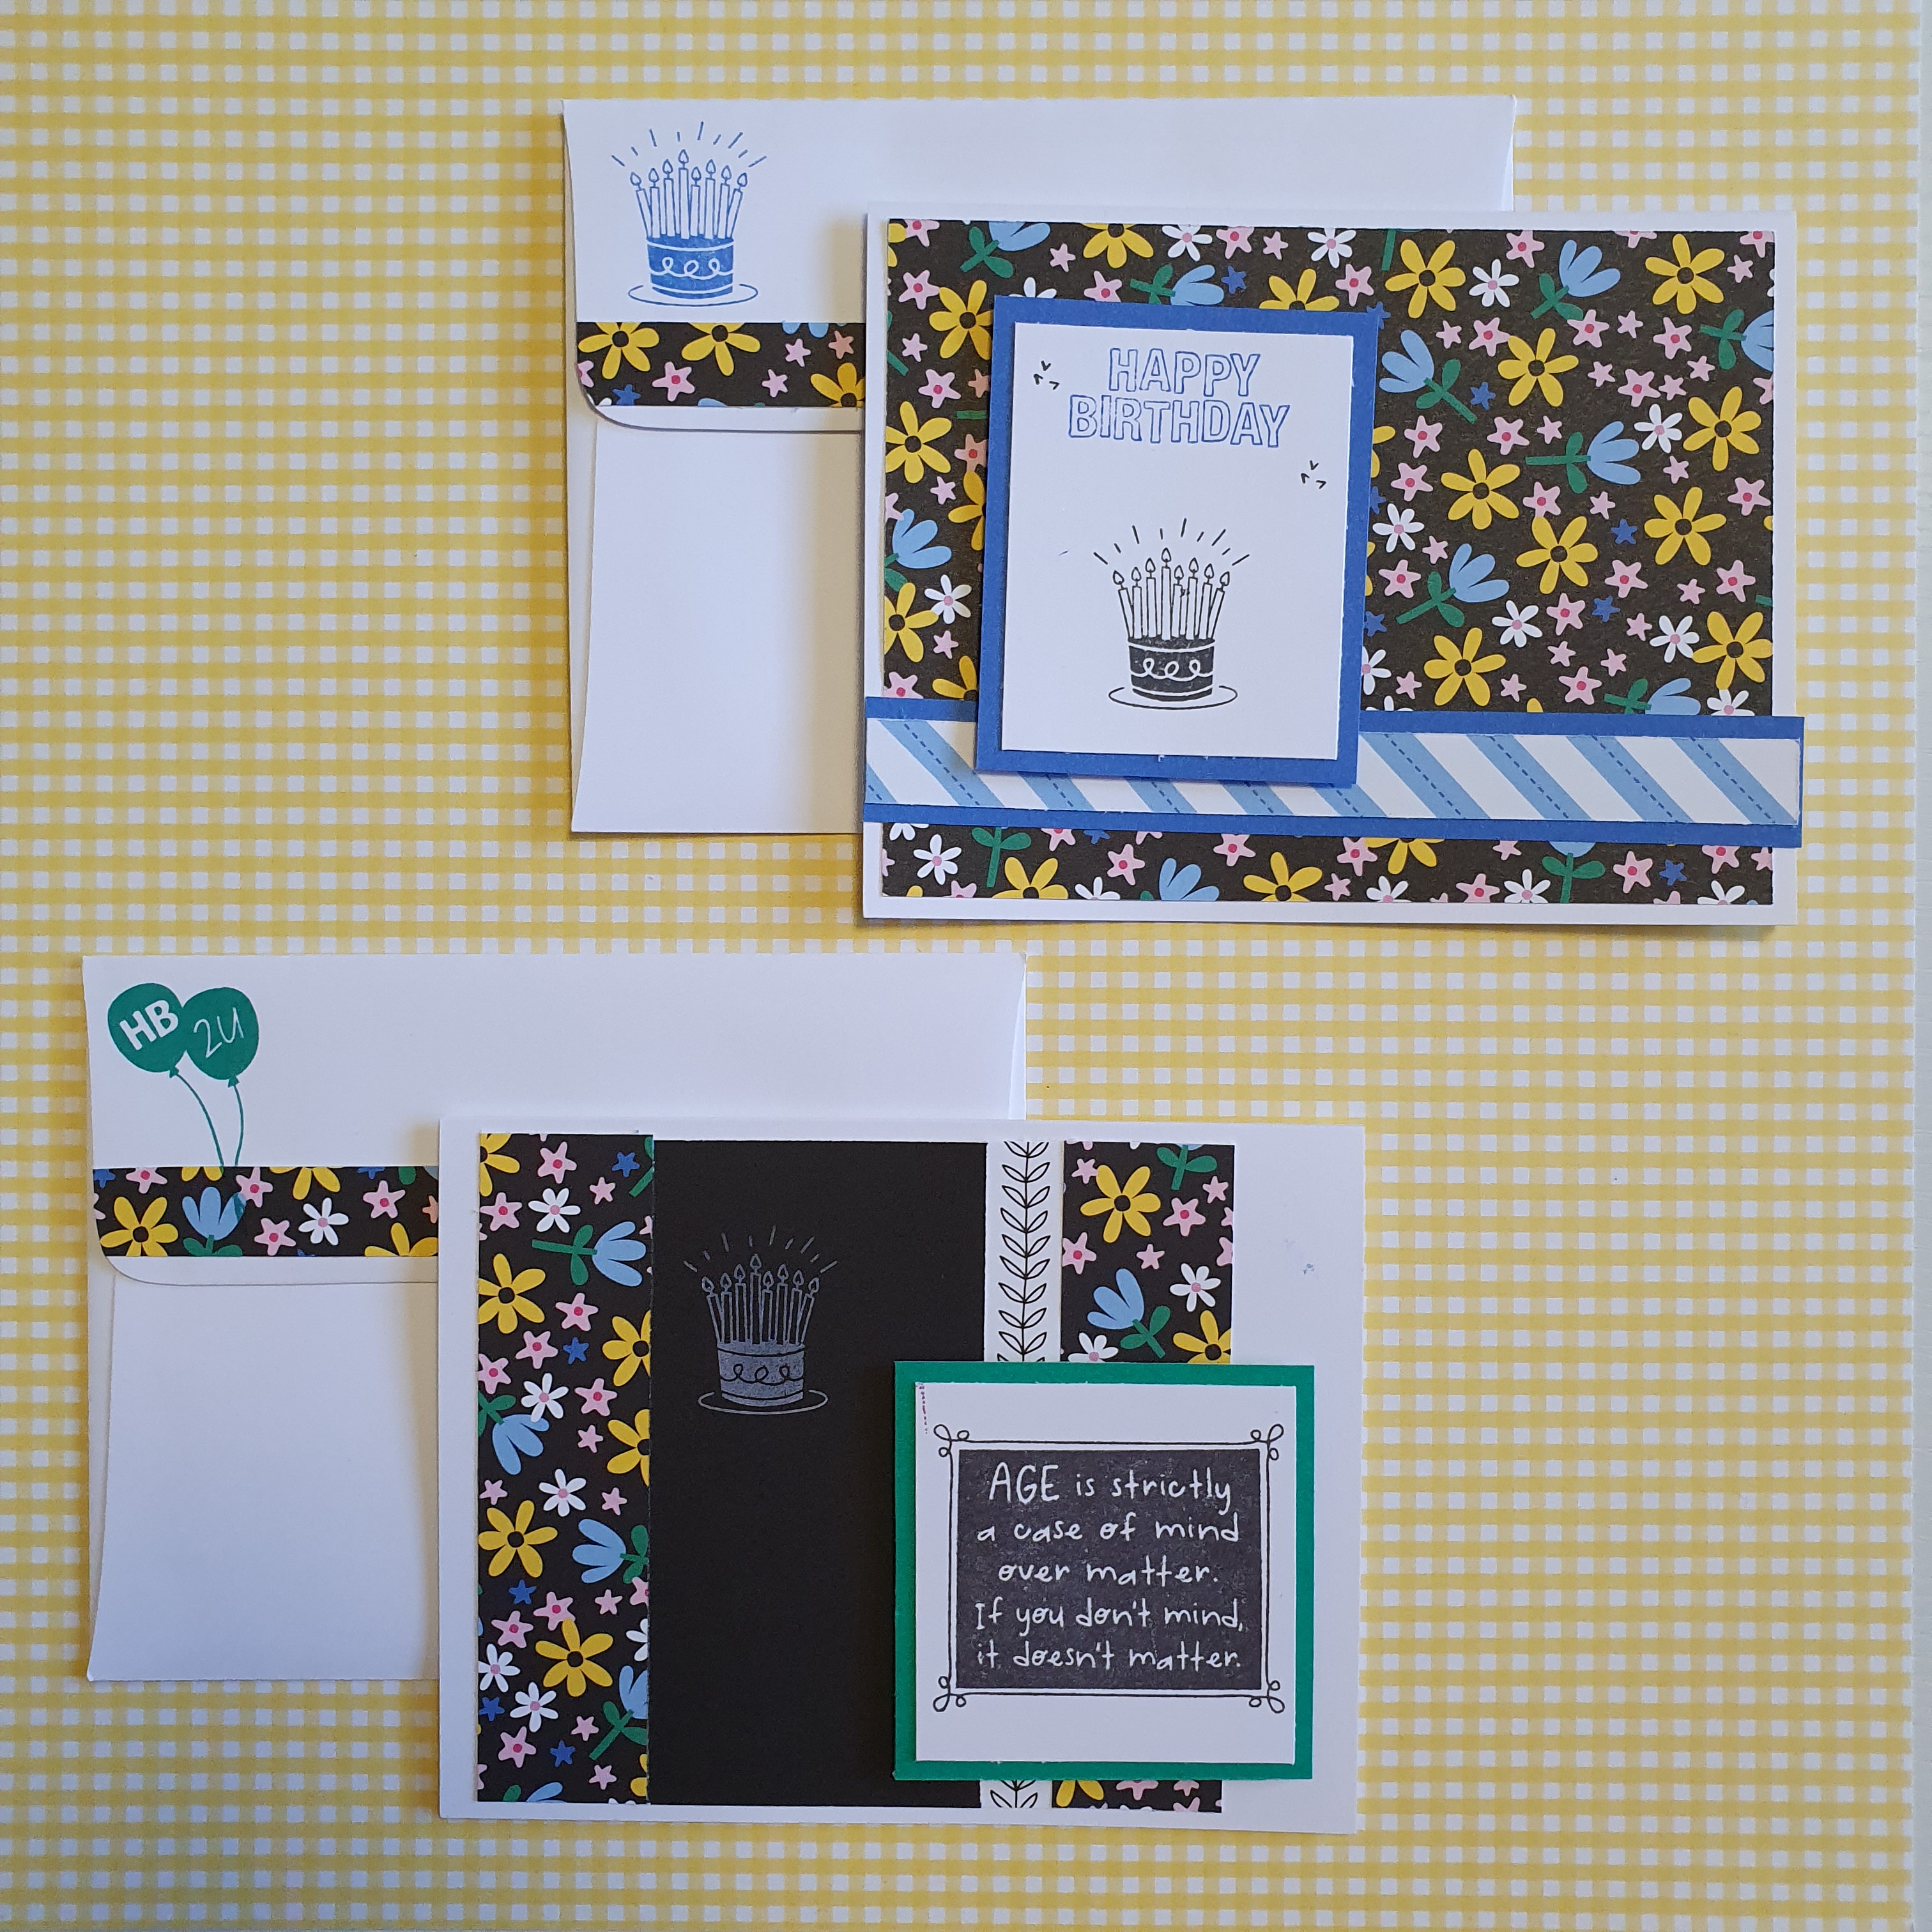 Close To My Heart’s Craft On collection adapts beautifully to a variety of scrapbook themes and card designs. Order your collection at www.shaunnarichards.closetomyheart.com.au before the end of August 2019